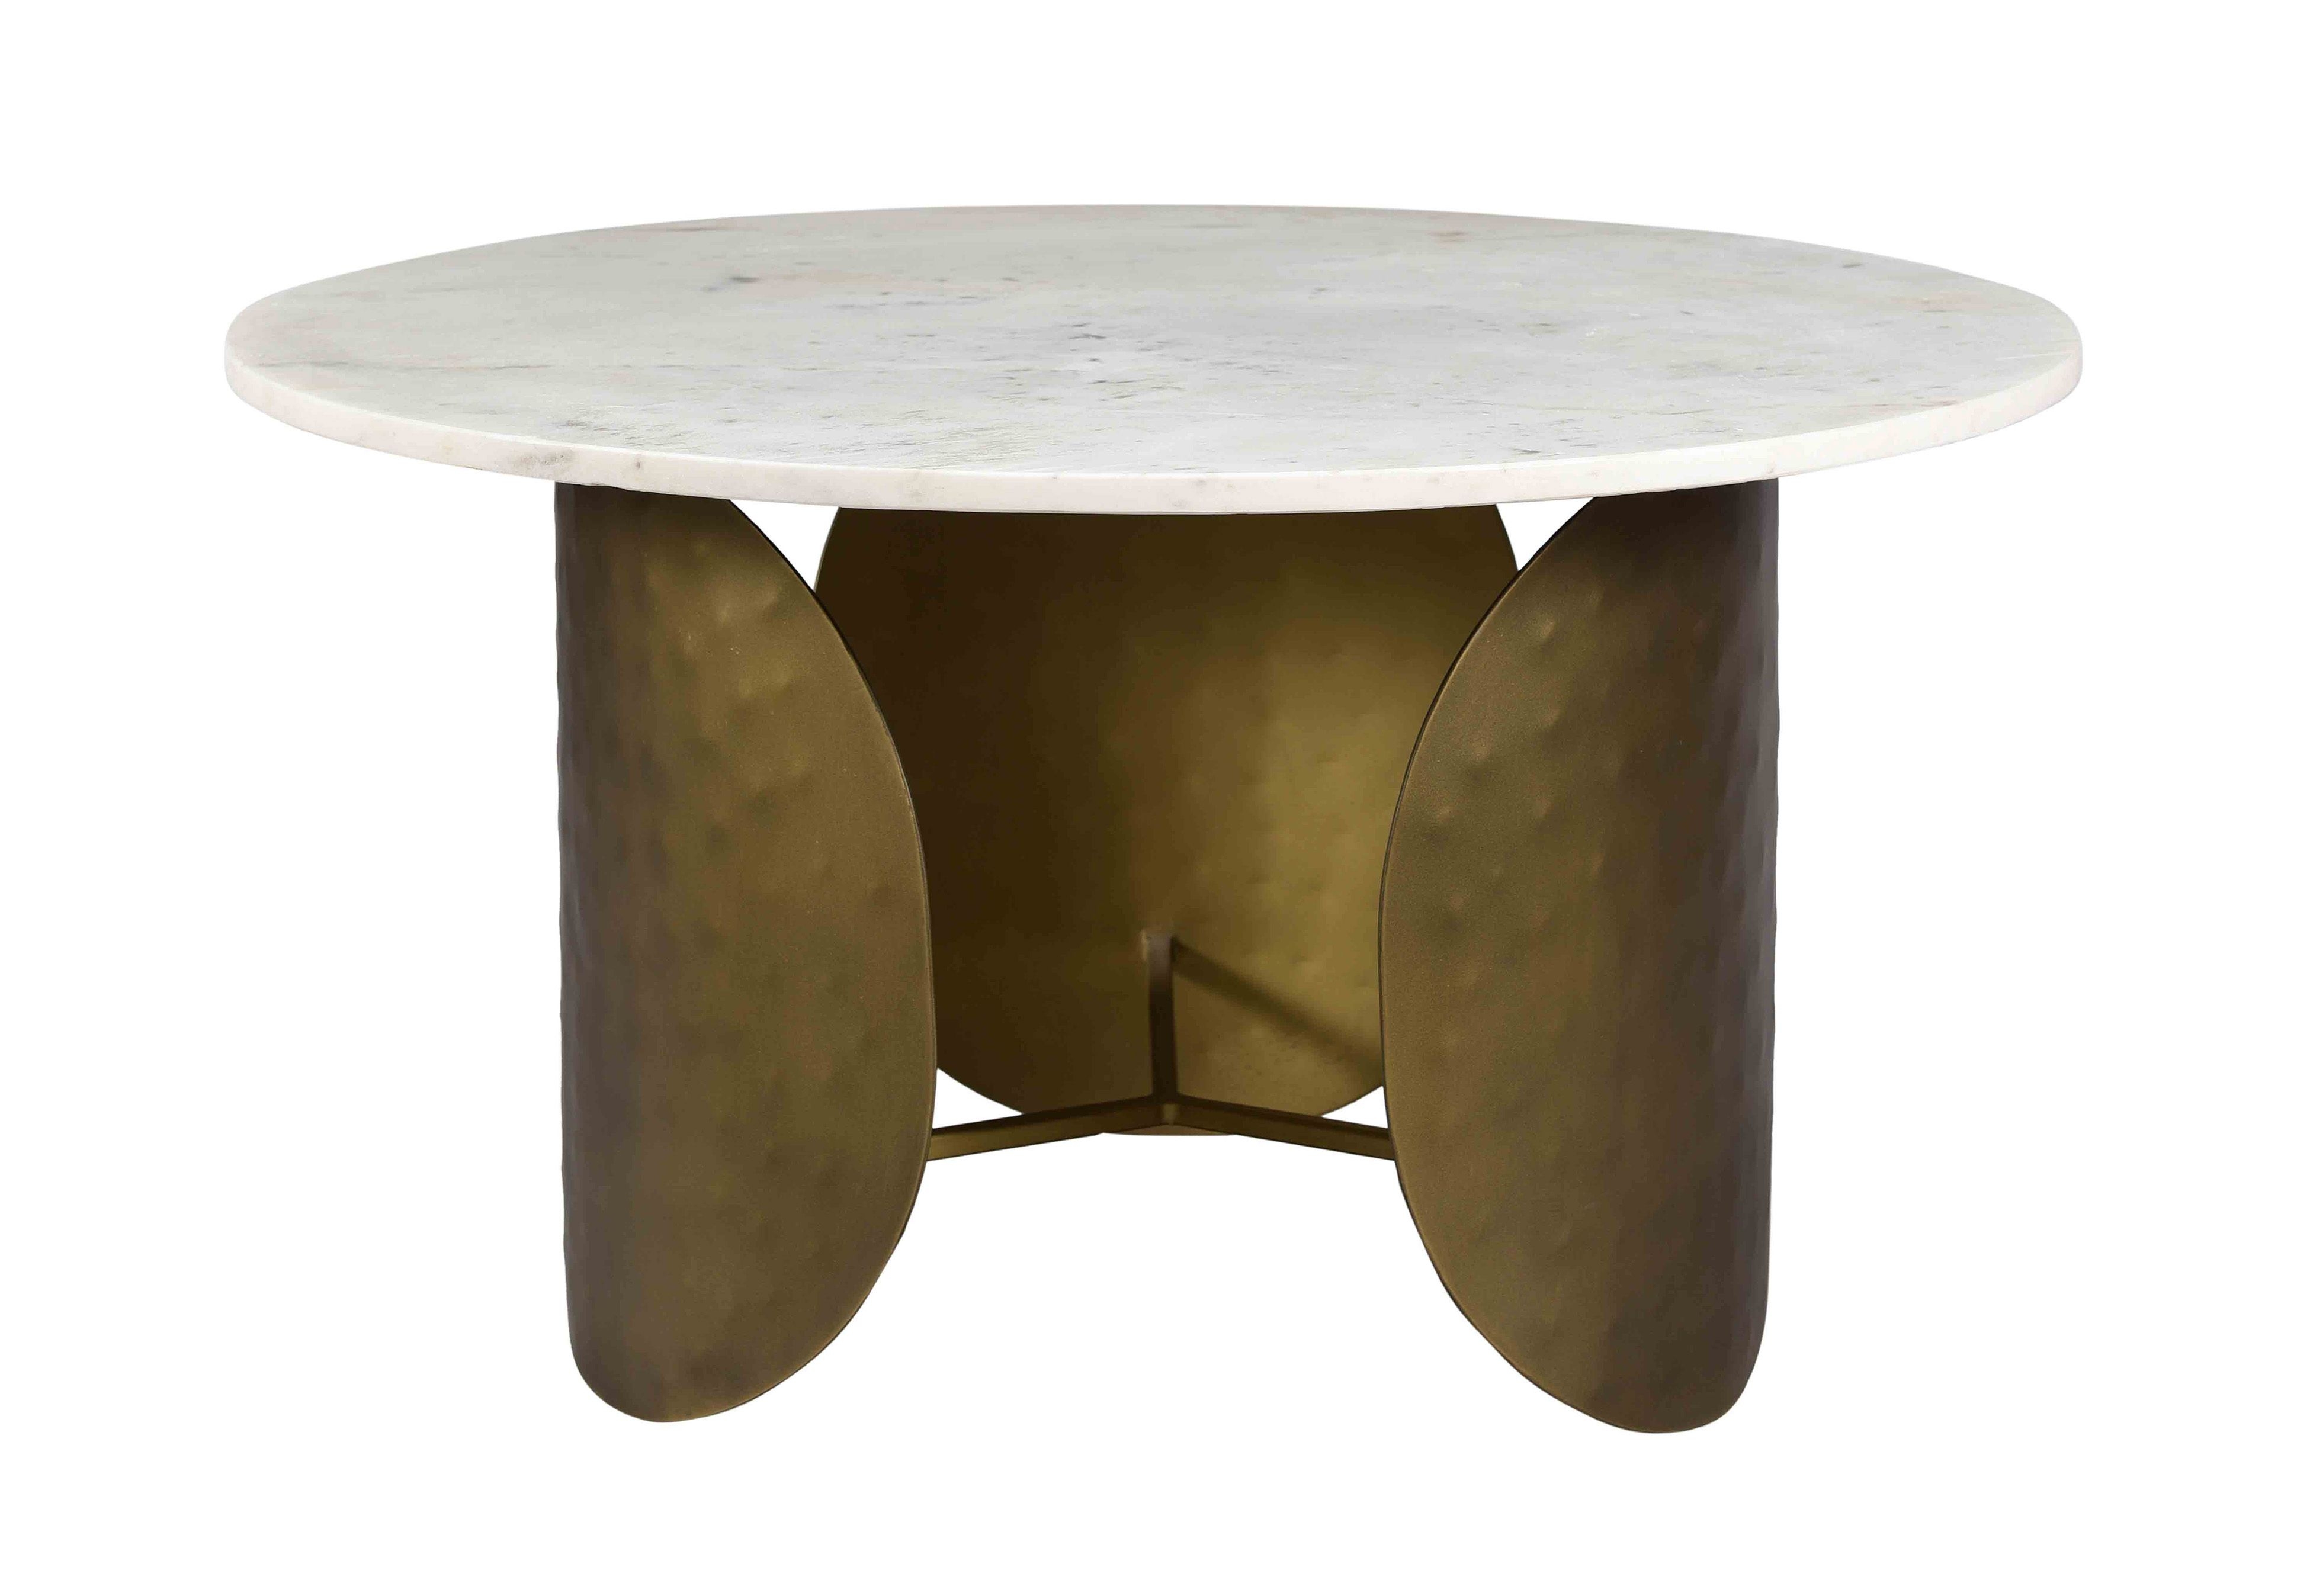 Indio Marble Cocktail Table, White - Image 4